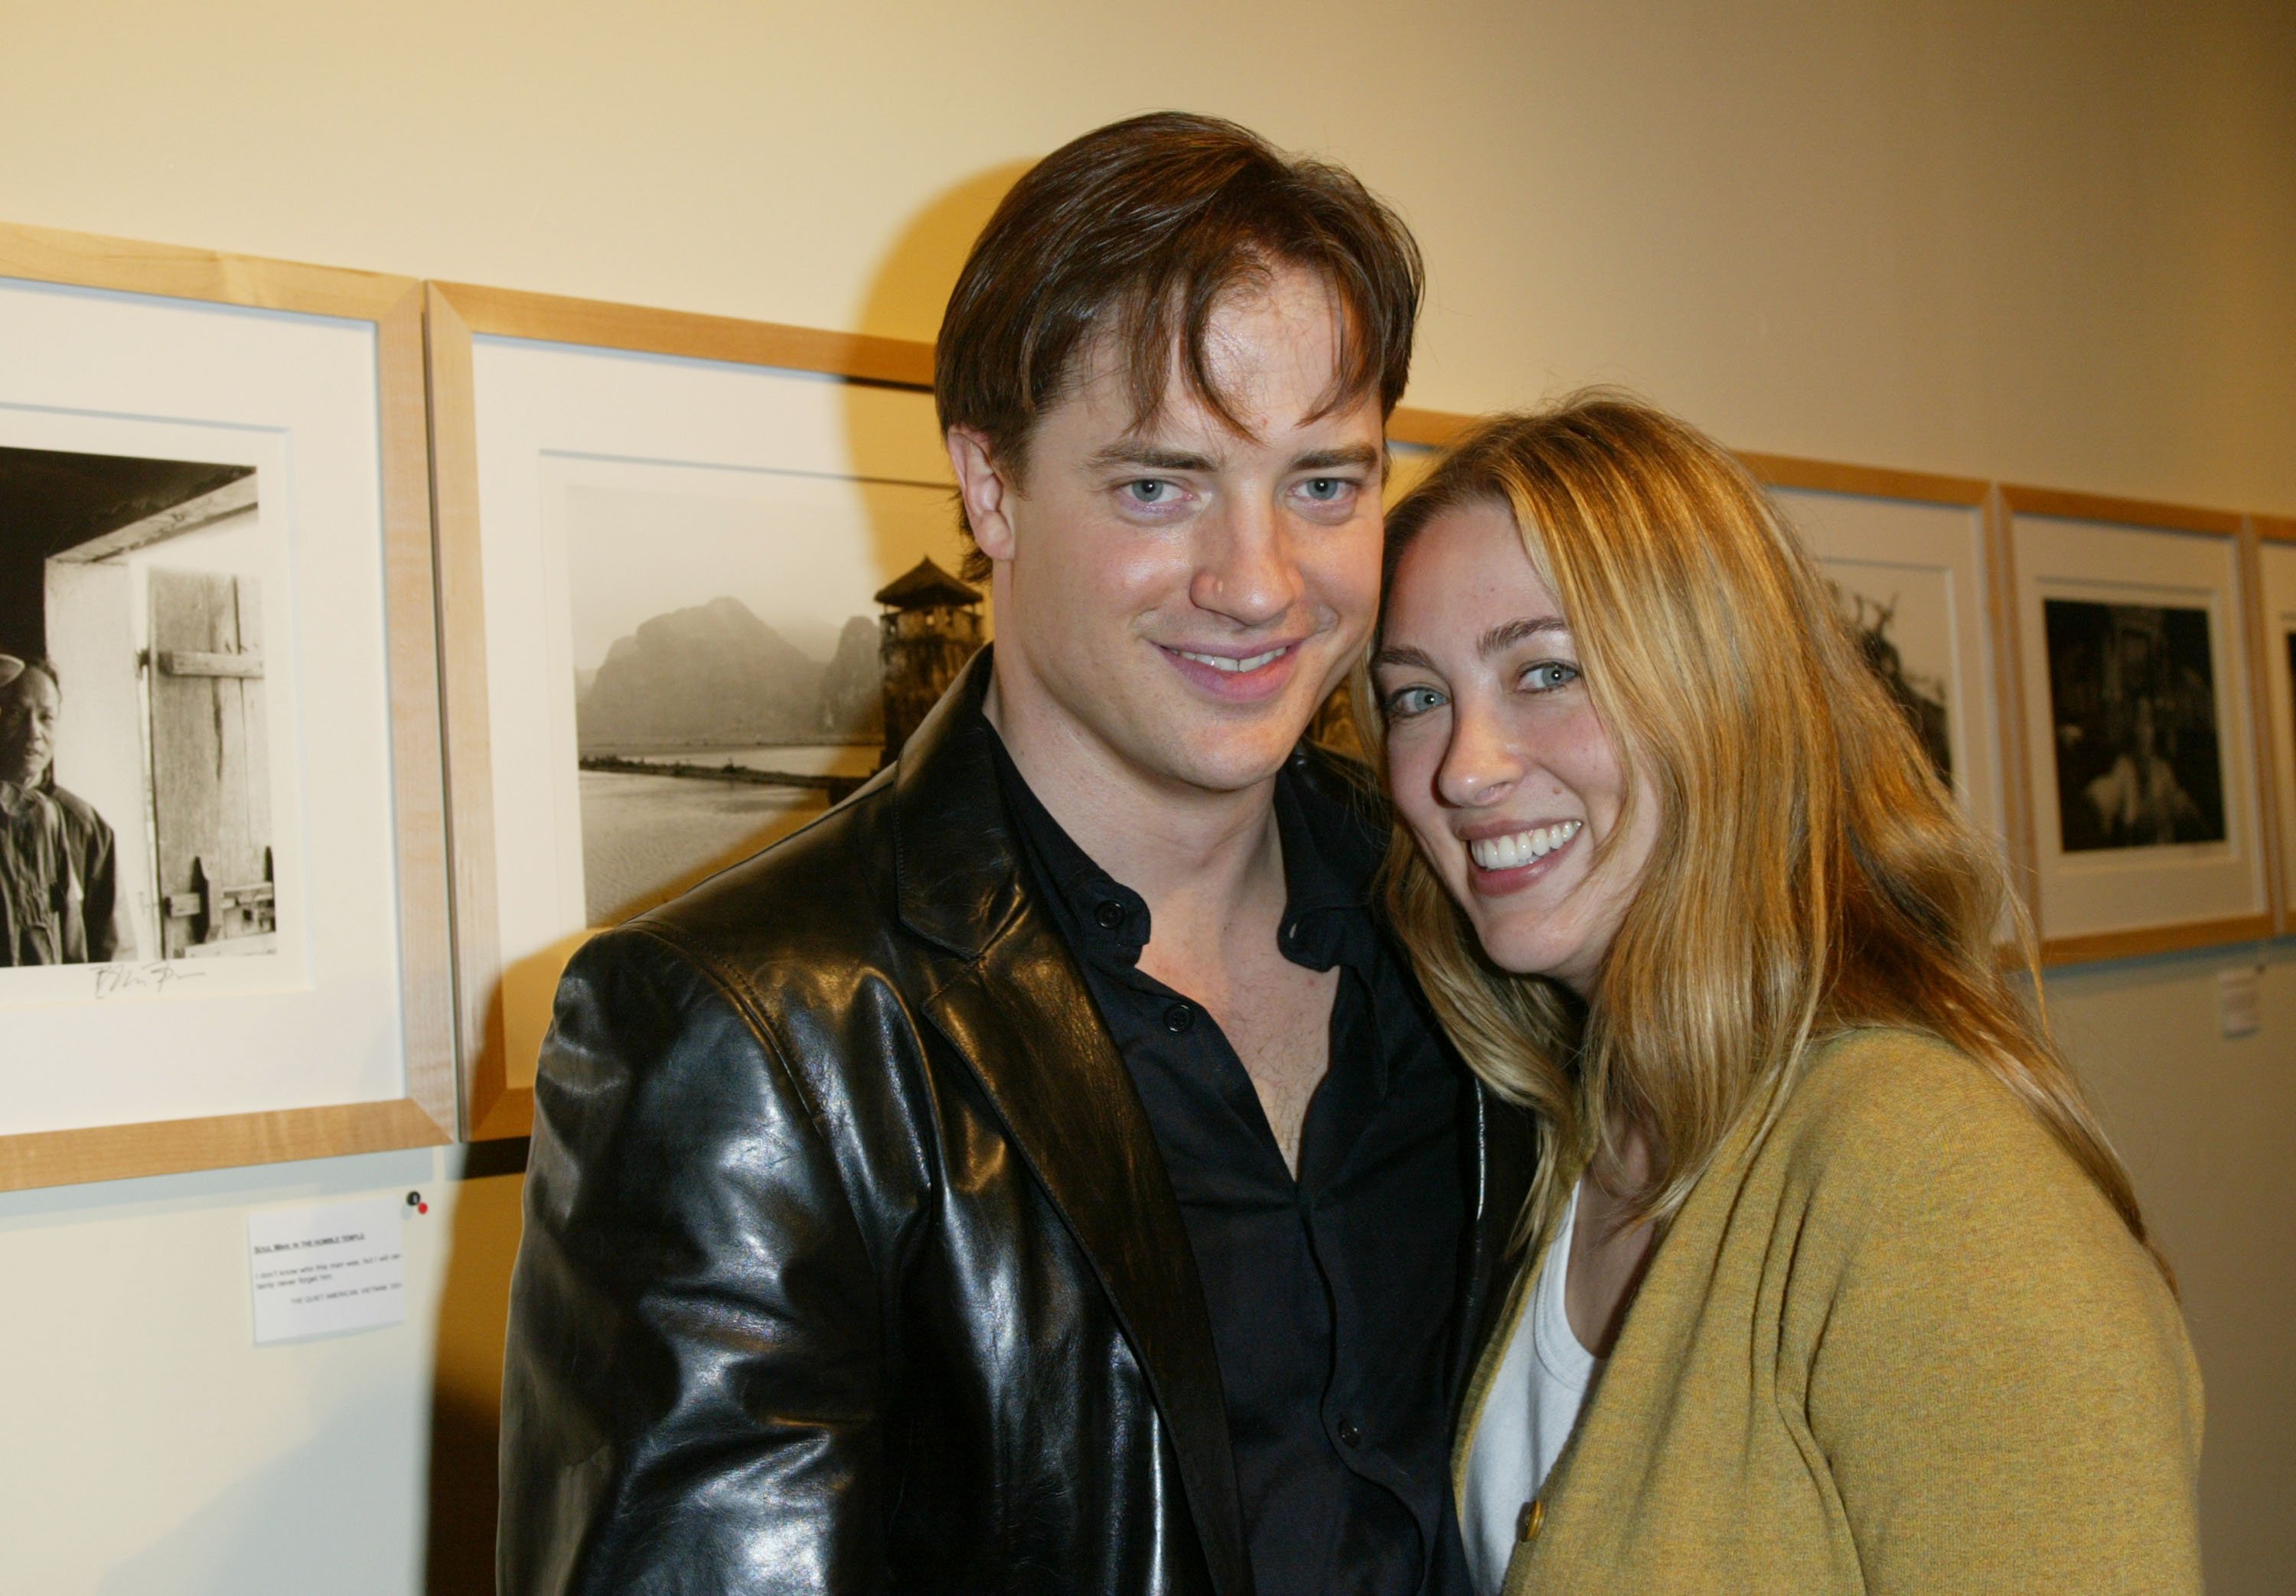 Brendan Fraser and Afton Smith at the Opening Night Exhibition of photographs by Brendan Fraser to benefit the 24th Street Theater at 24th Street Theatre in Los Angeles, California. | Source: Getty Images